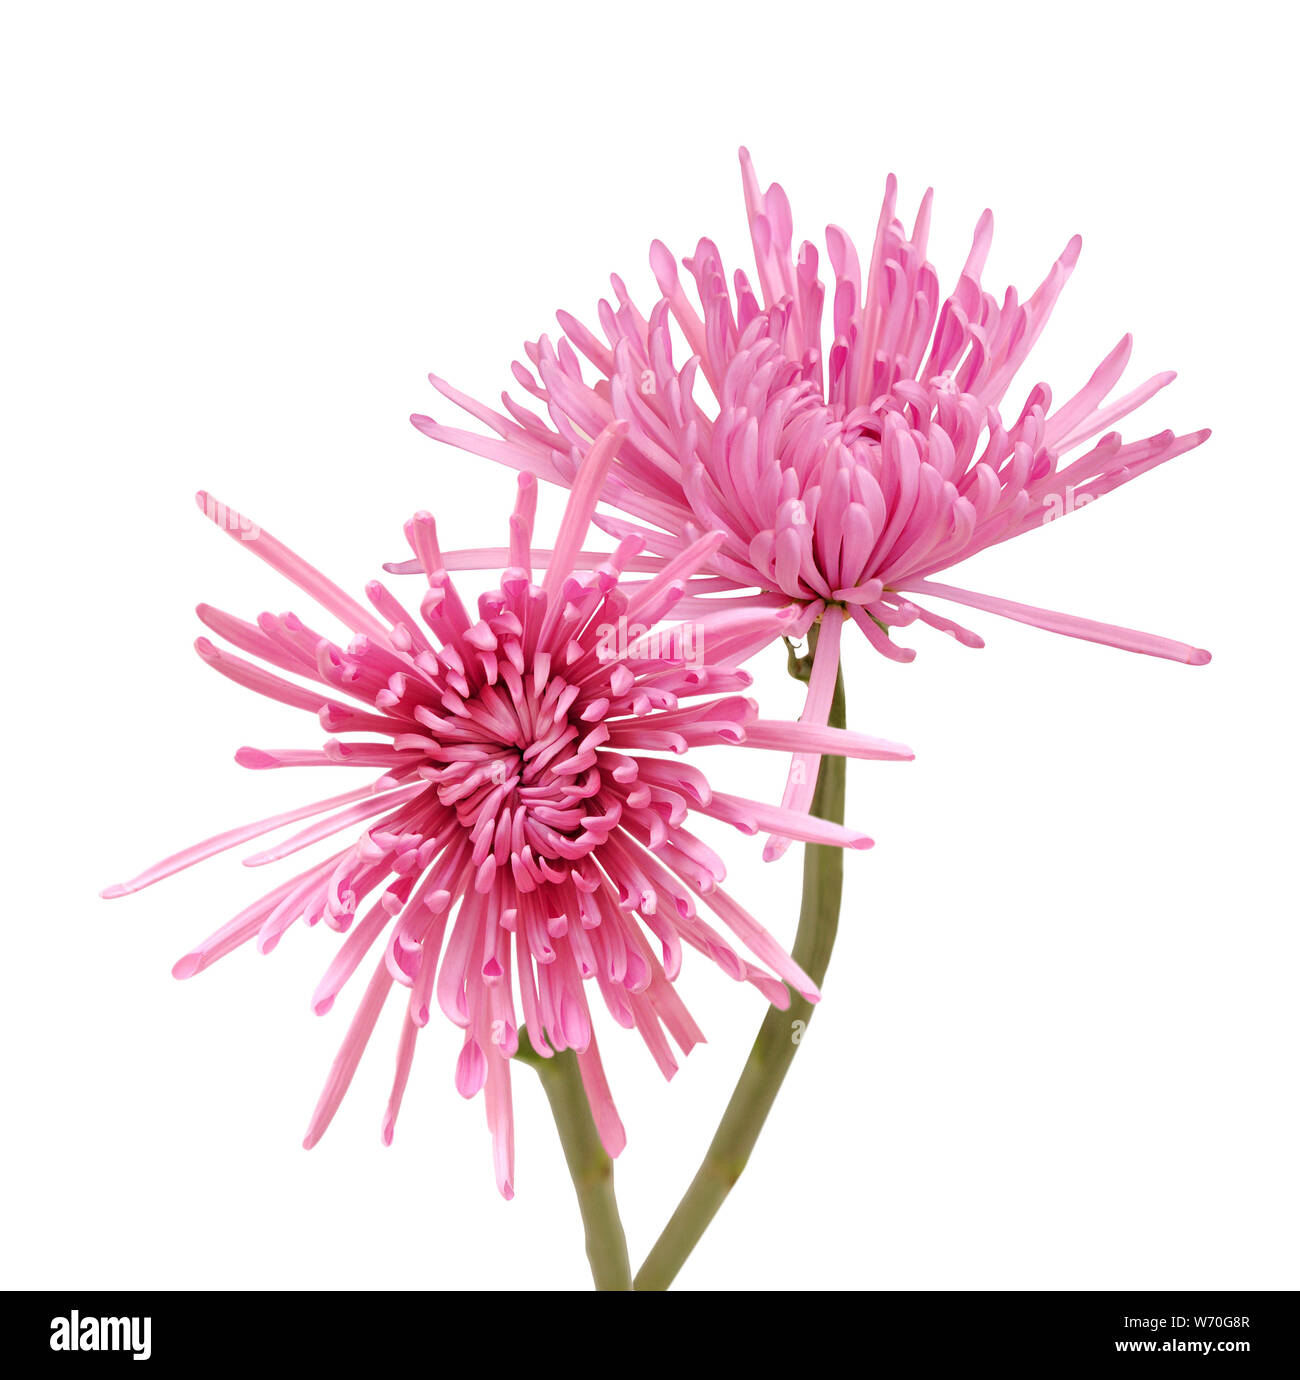 pink spider mum (aster) flower isolated on white background Stock Photo